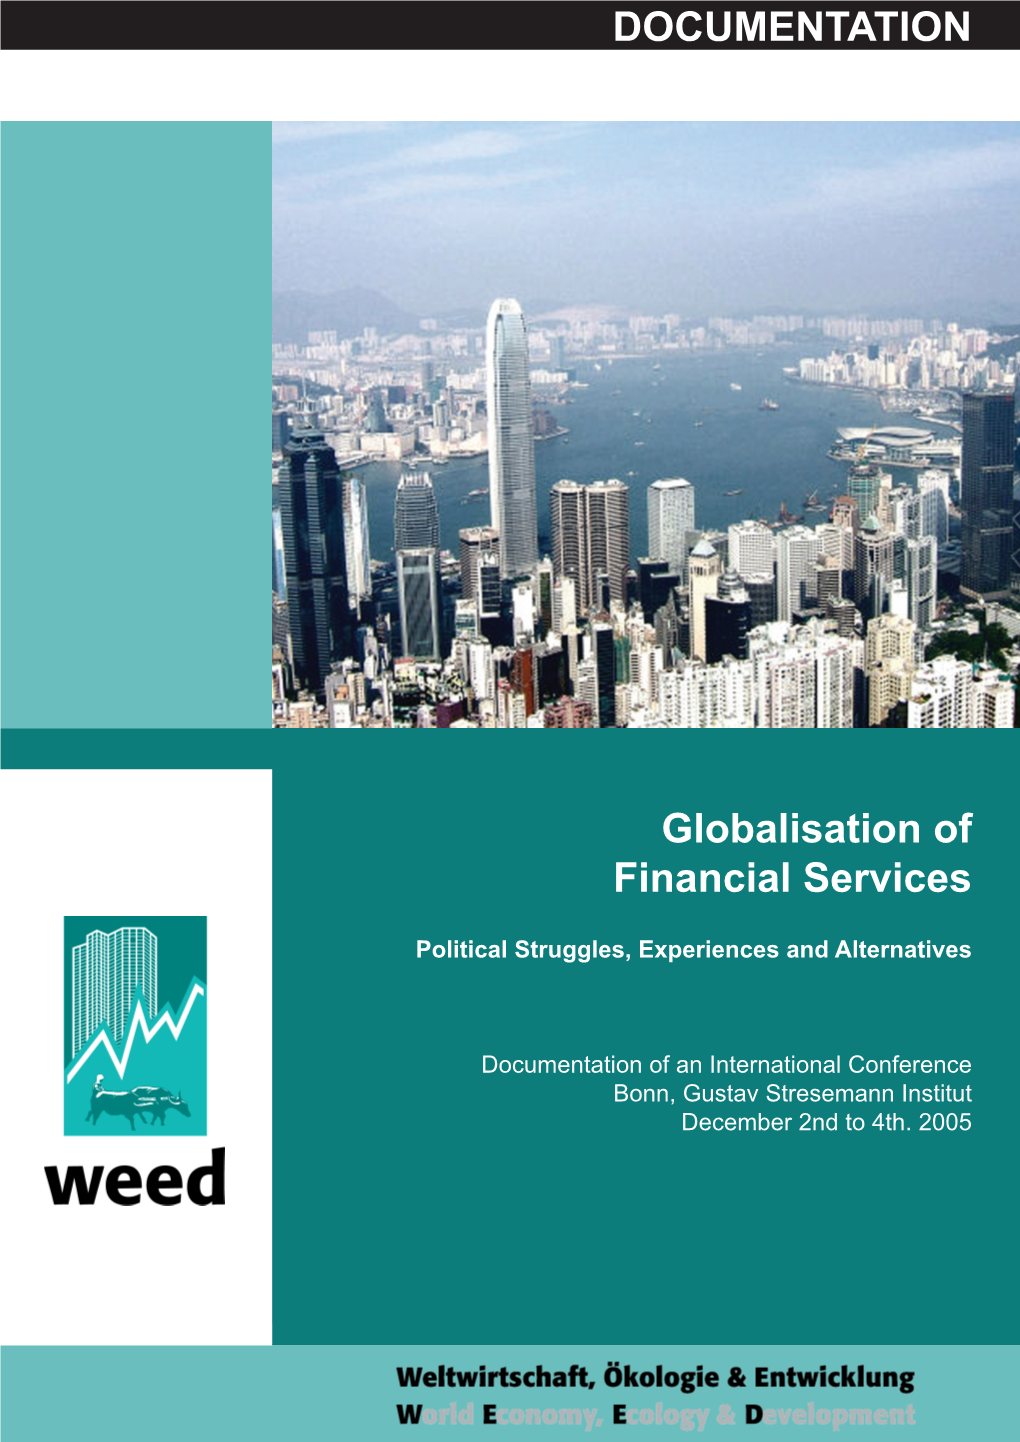 Globalisation of Financial Services DOCUMENTATION